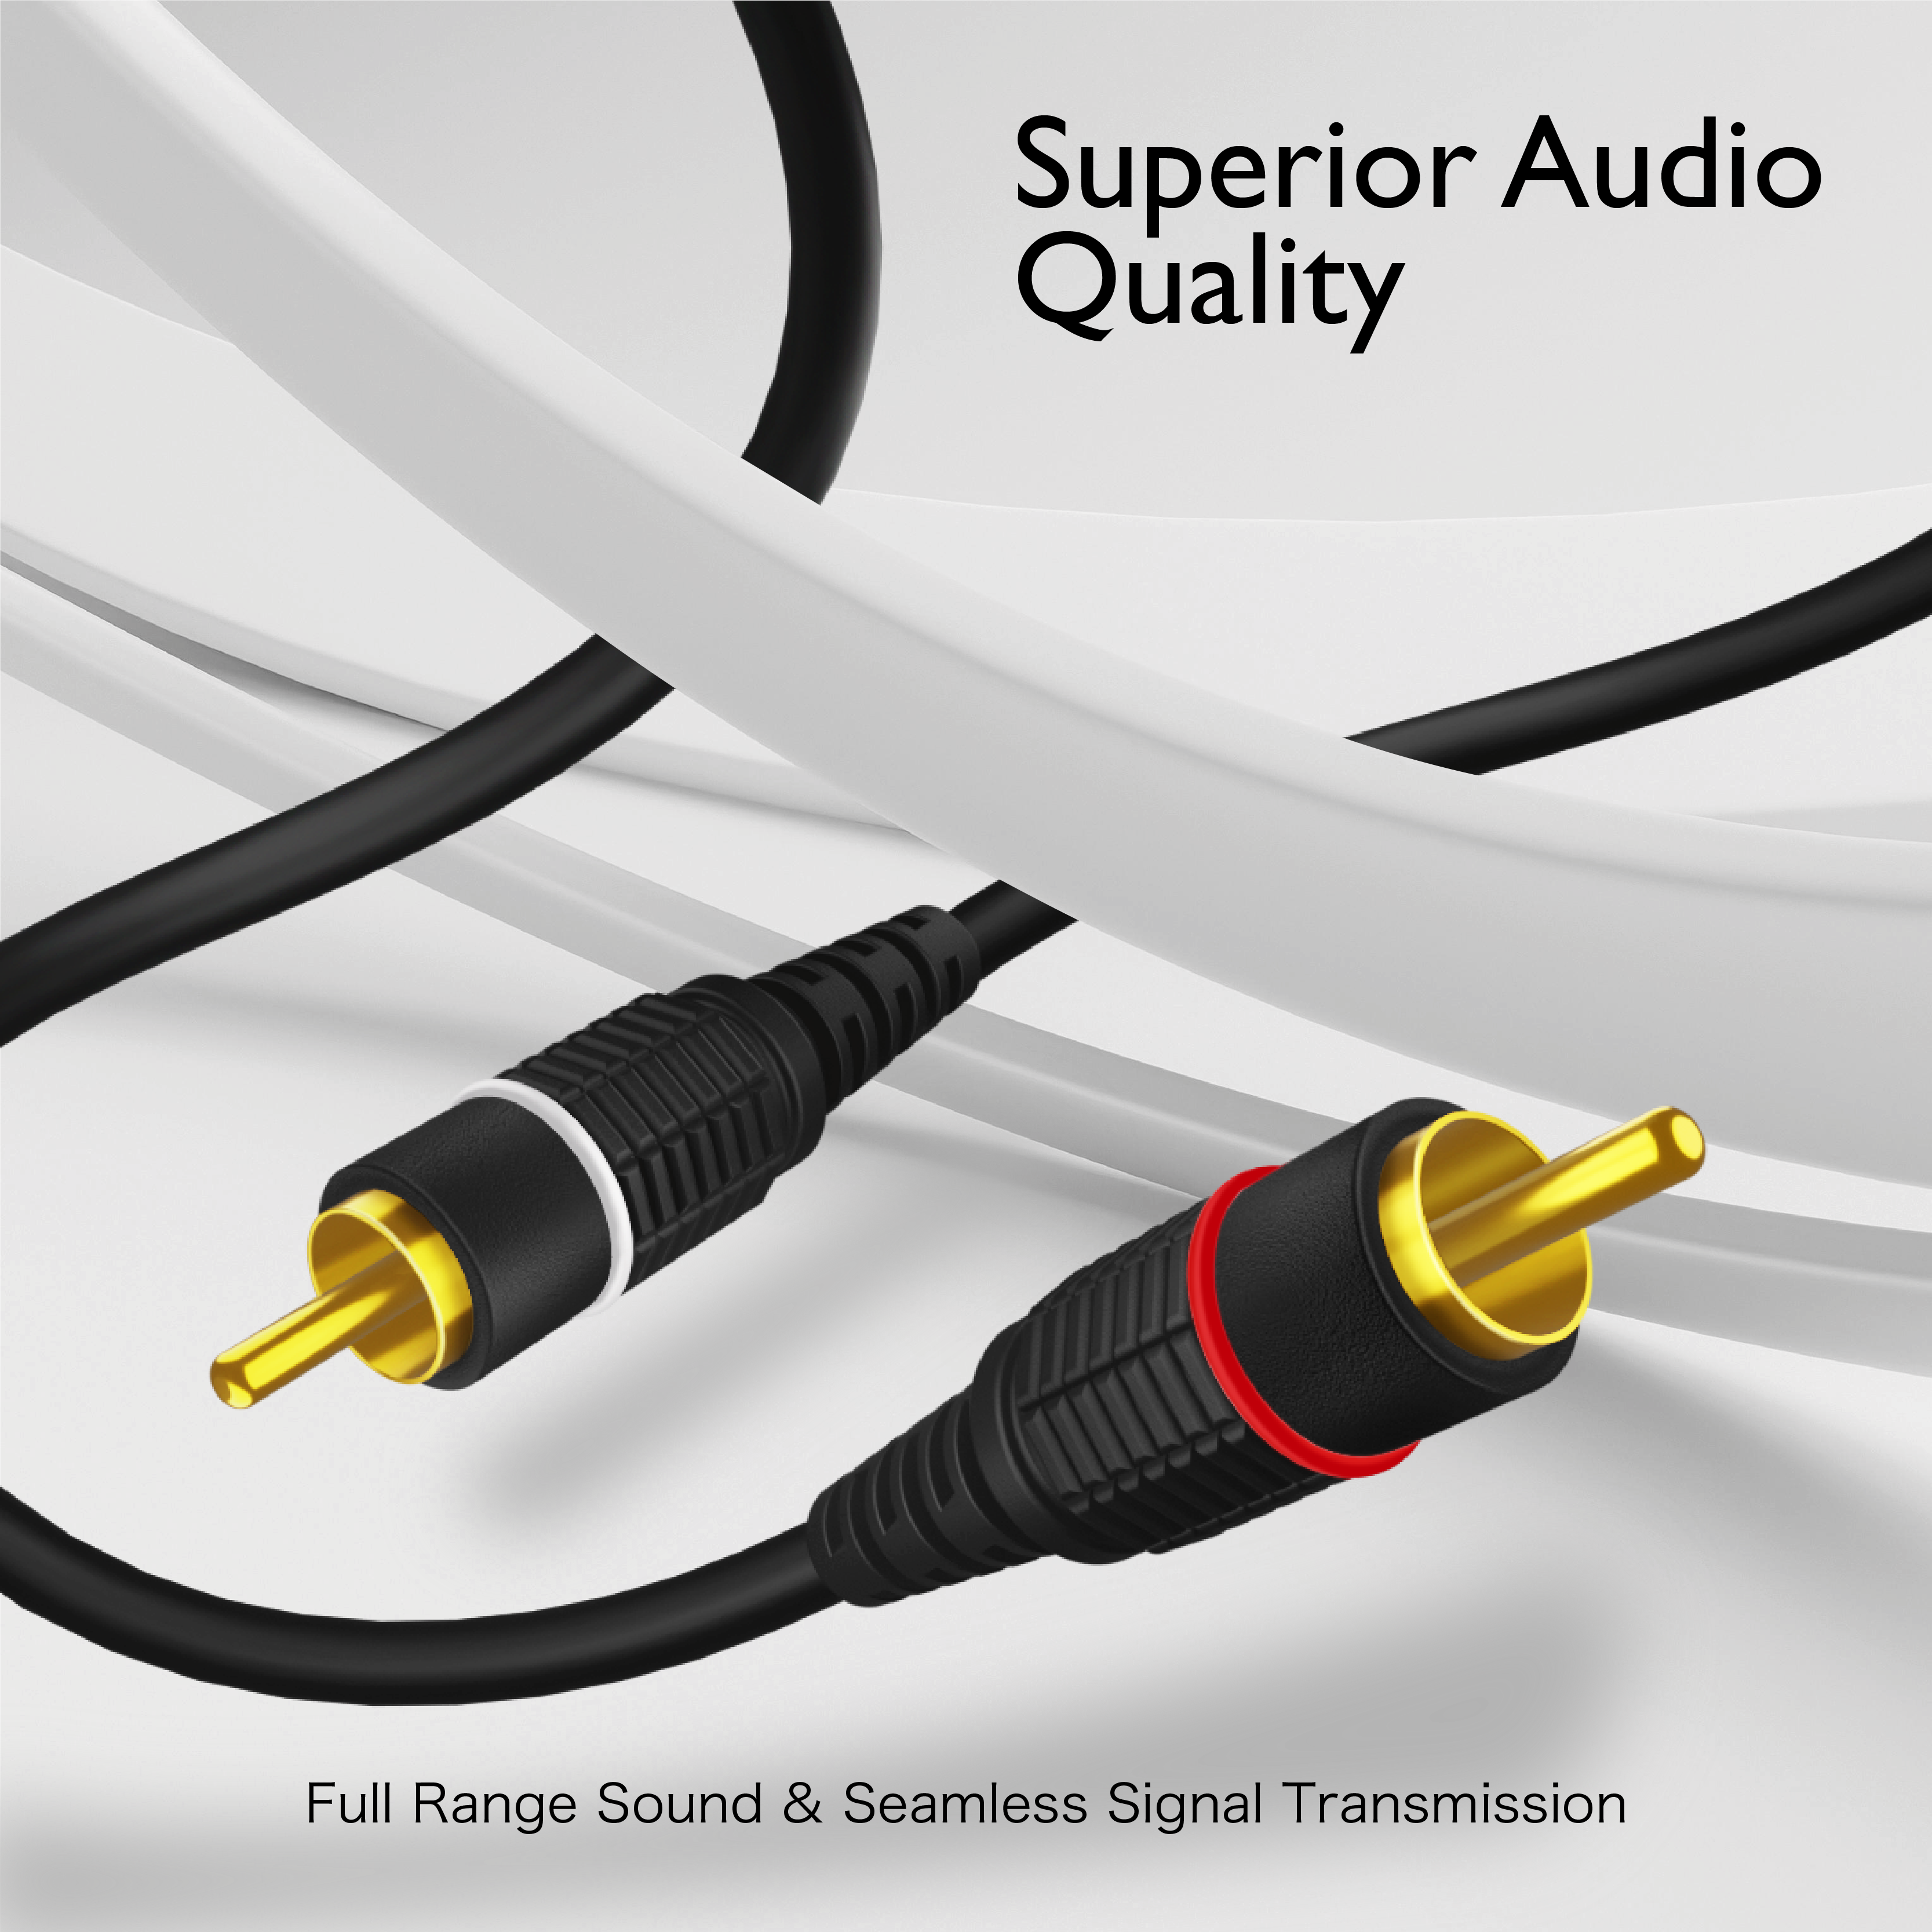 2RCA Stereo Audio Cable (25 Feet) - Dual RCA Plug M/M 2 Channel (Right and Left) Gold Plated Dual Shielded RCA to RCA Male Connectors Black - image 3 of 6